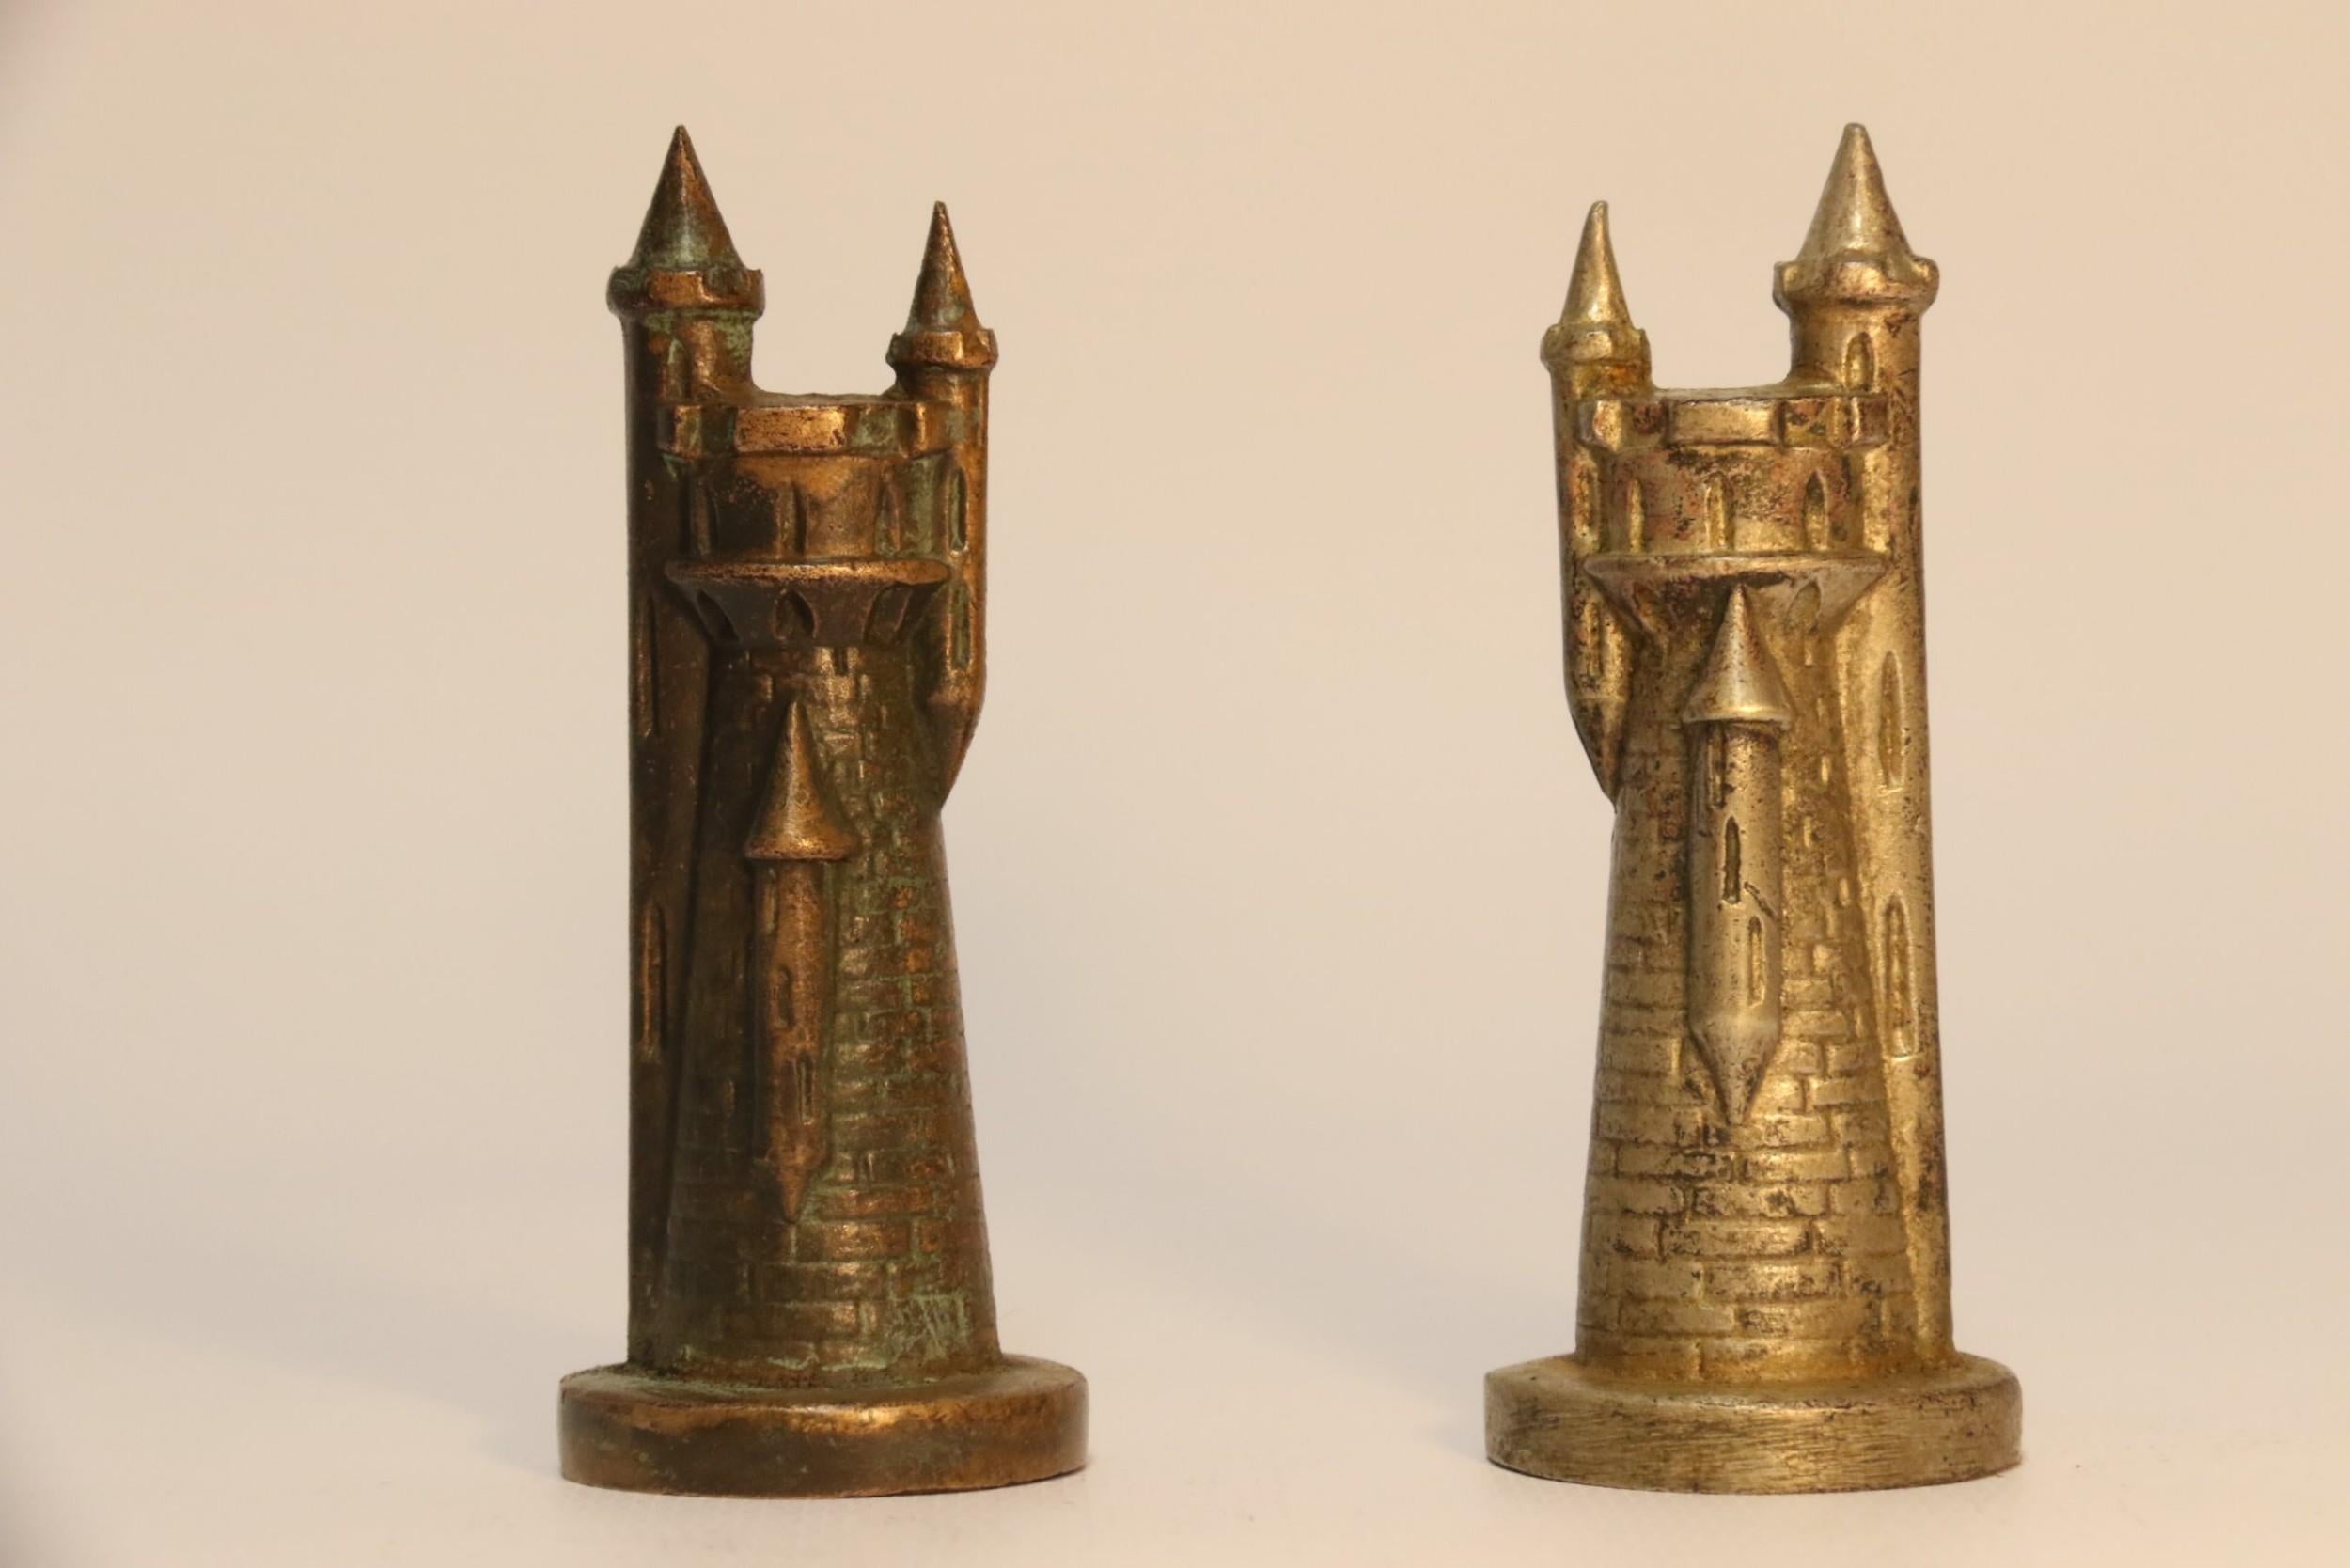 Novelty Heavy Cast Nickel and Bronze Chess Set Modeled on Medieval Figures For Sale 9